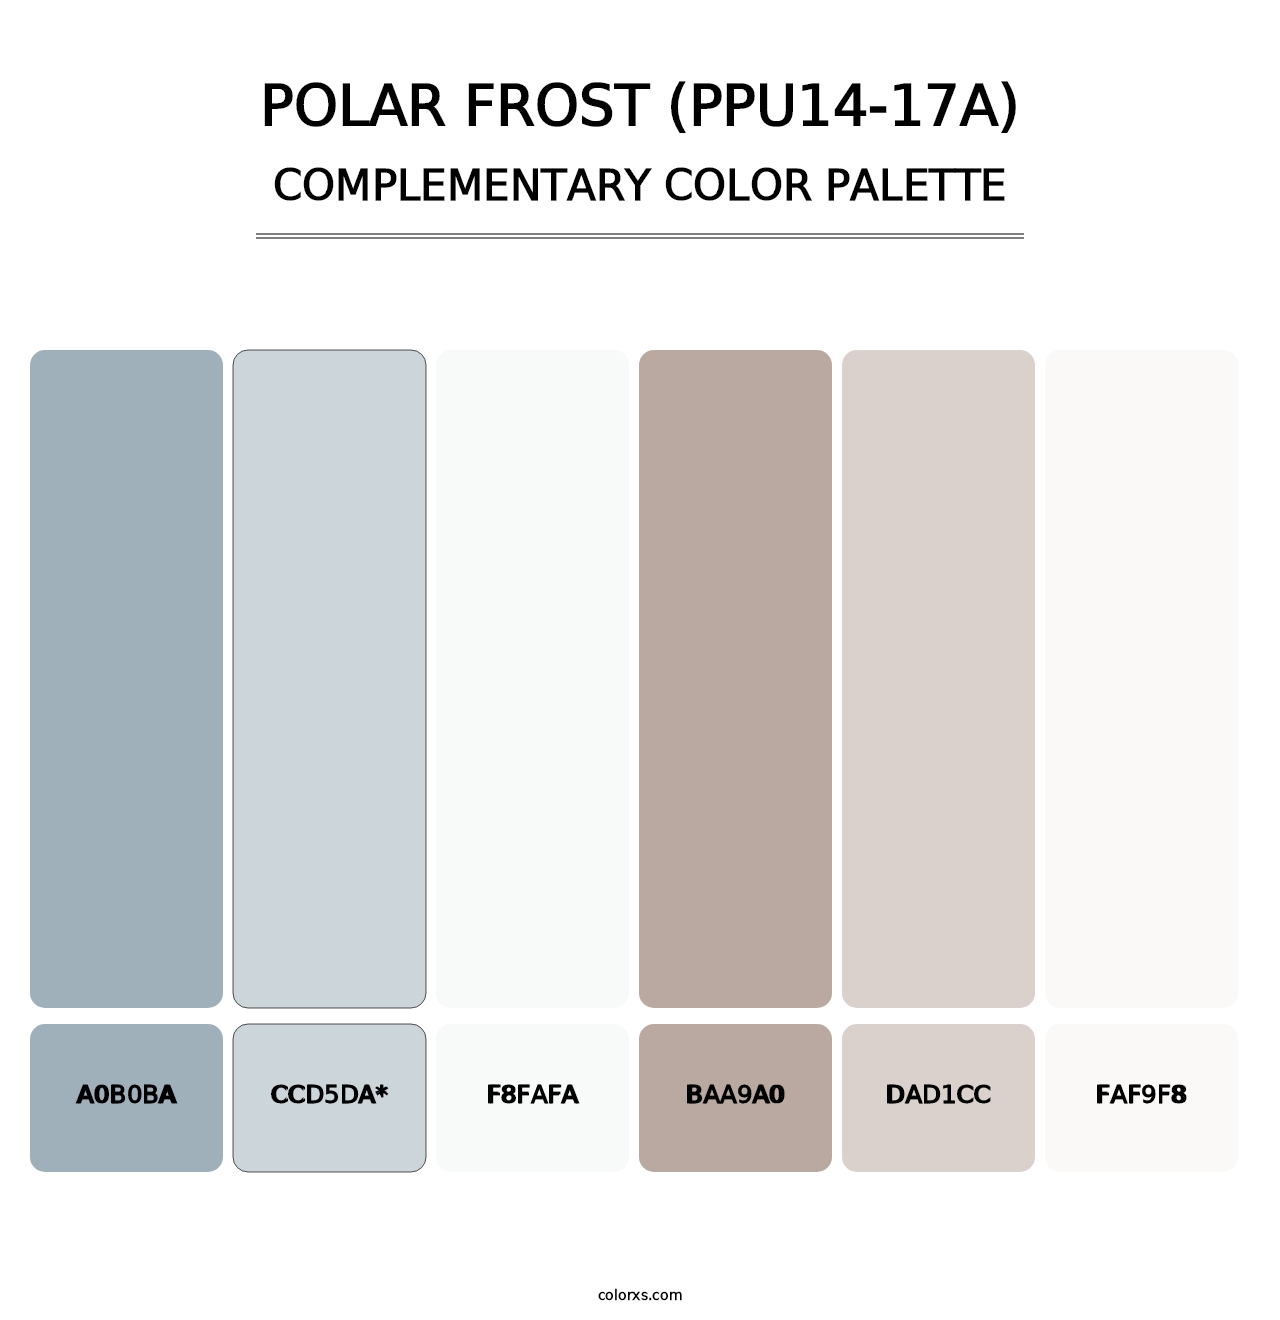 Polar Frost (PPU14-17A) - Complementary Color Palette